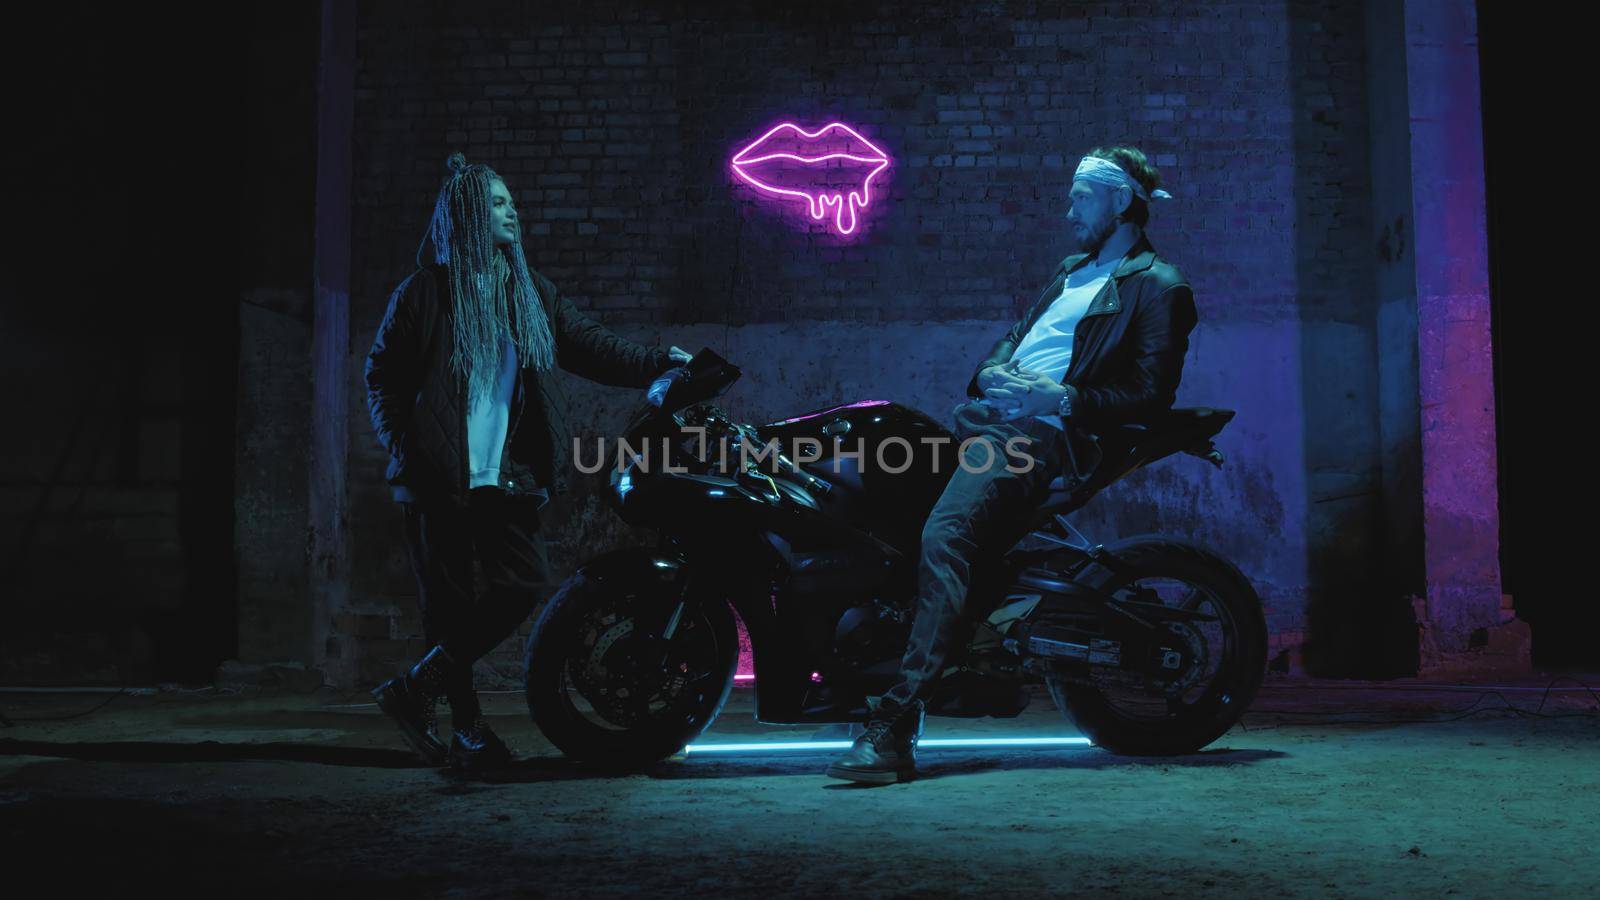 A guy on a super sport motorcycle stands talking to a girl against a pink neon sign by studiodav